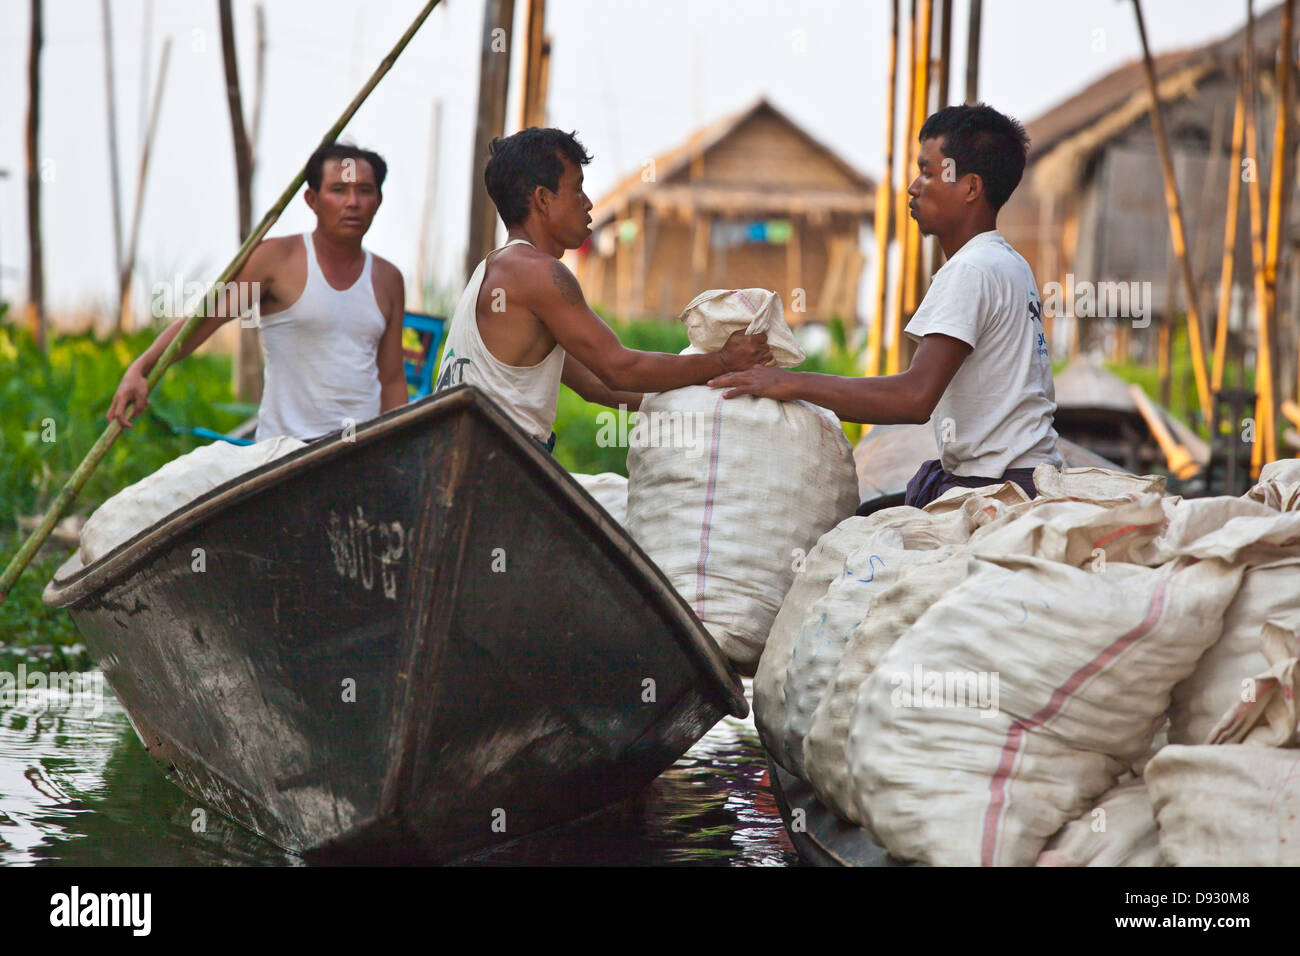 Unloading product from a boat in the village of PWE SAR KONE - INLE LAKE, MYANMAR Stock Photo